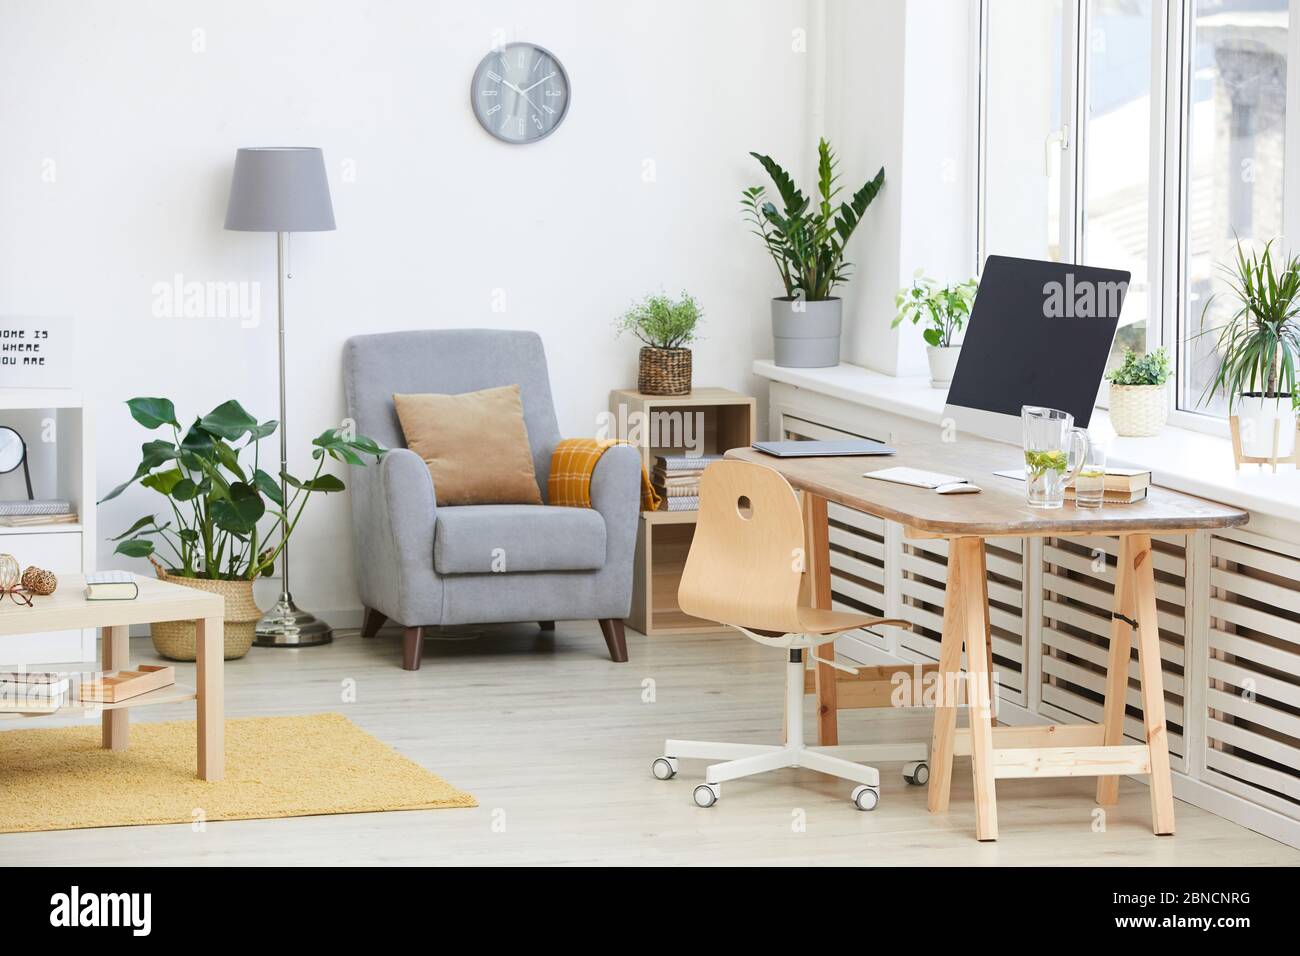 Image of domestic room with modern furniture in apartment Stock Photo